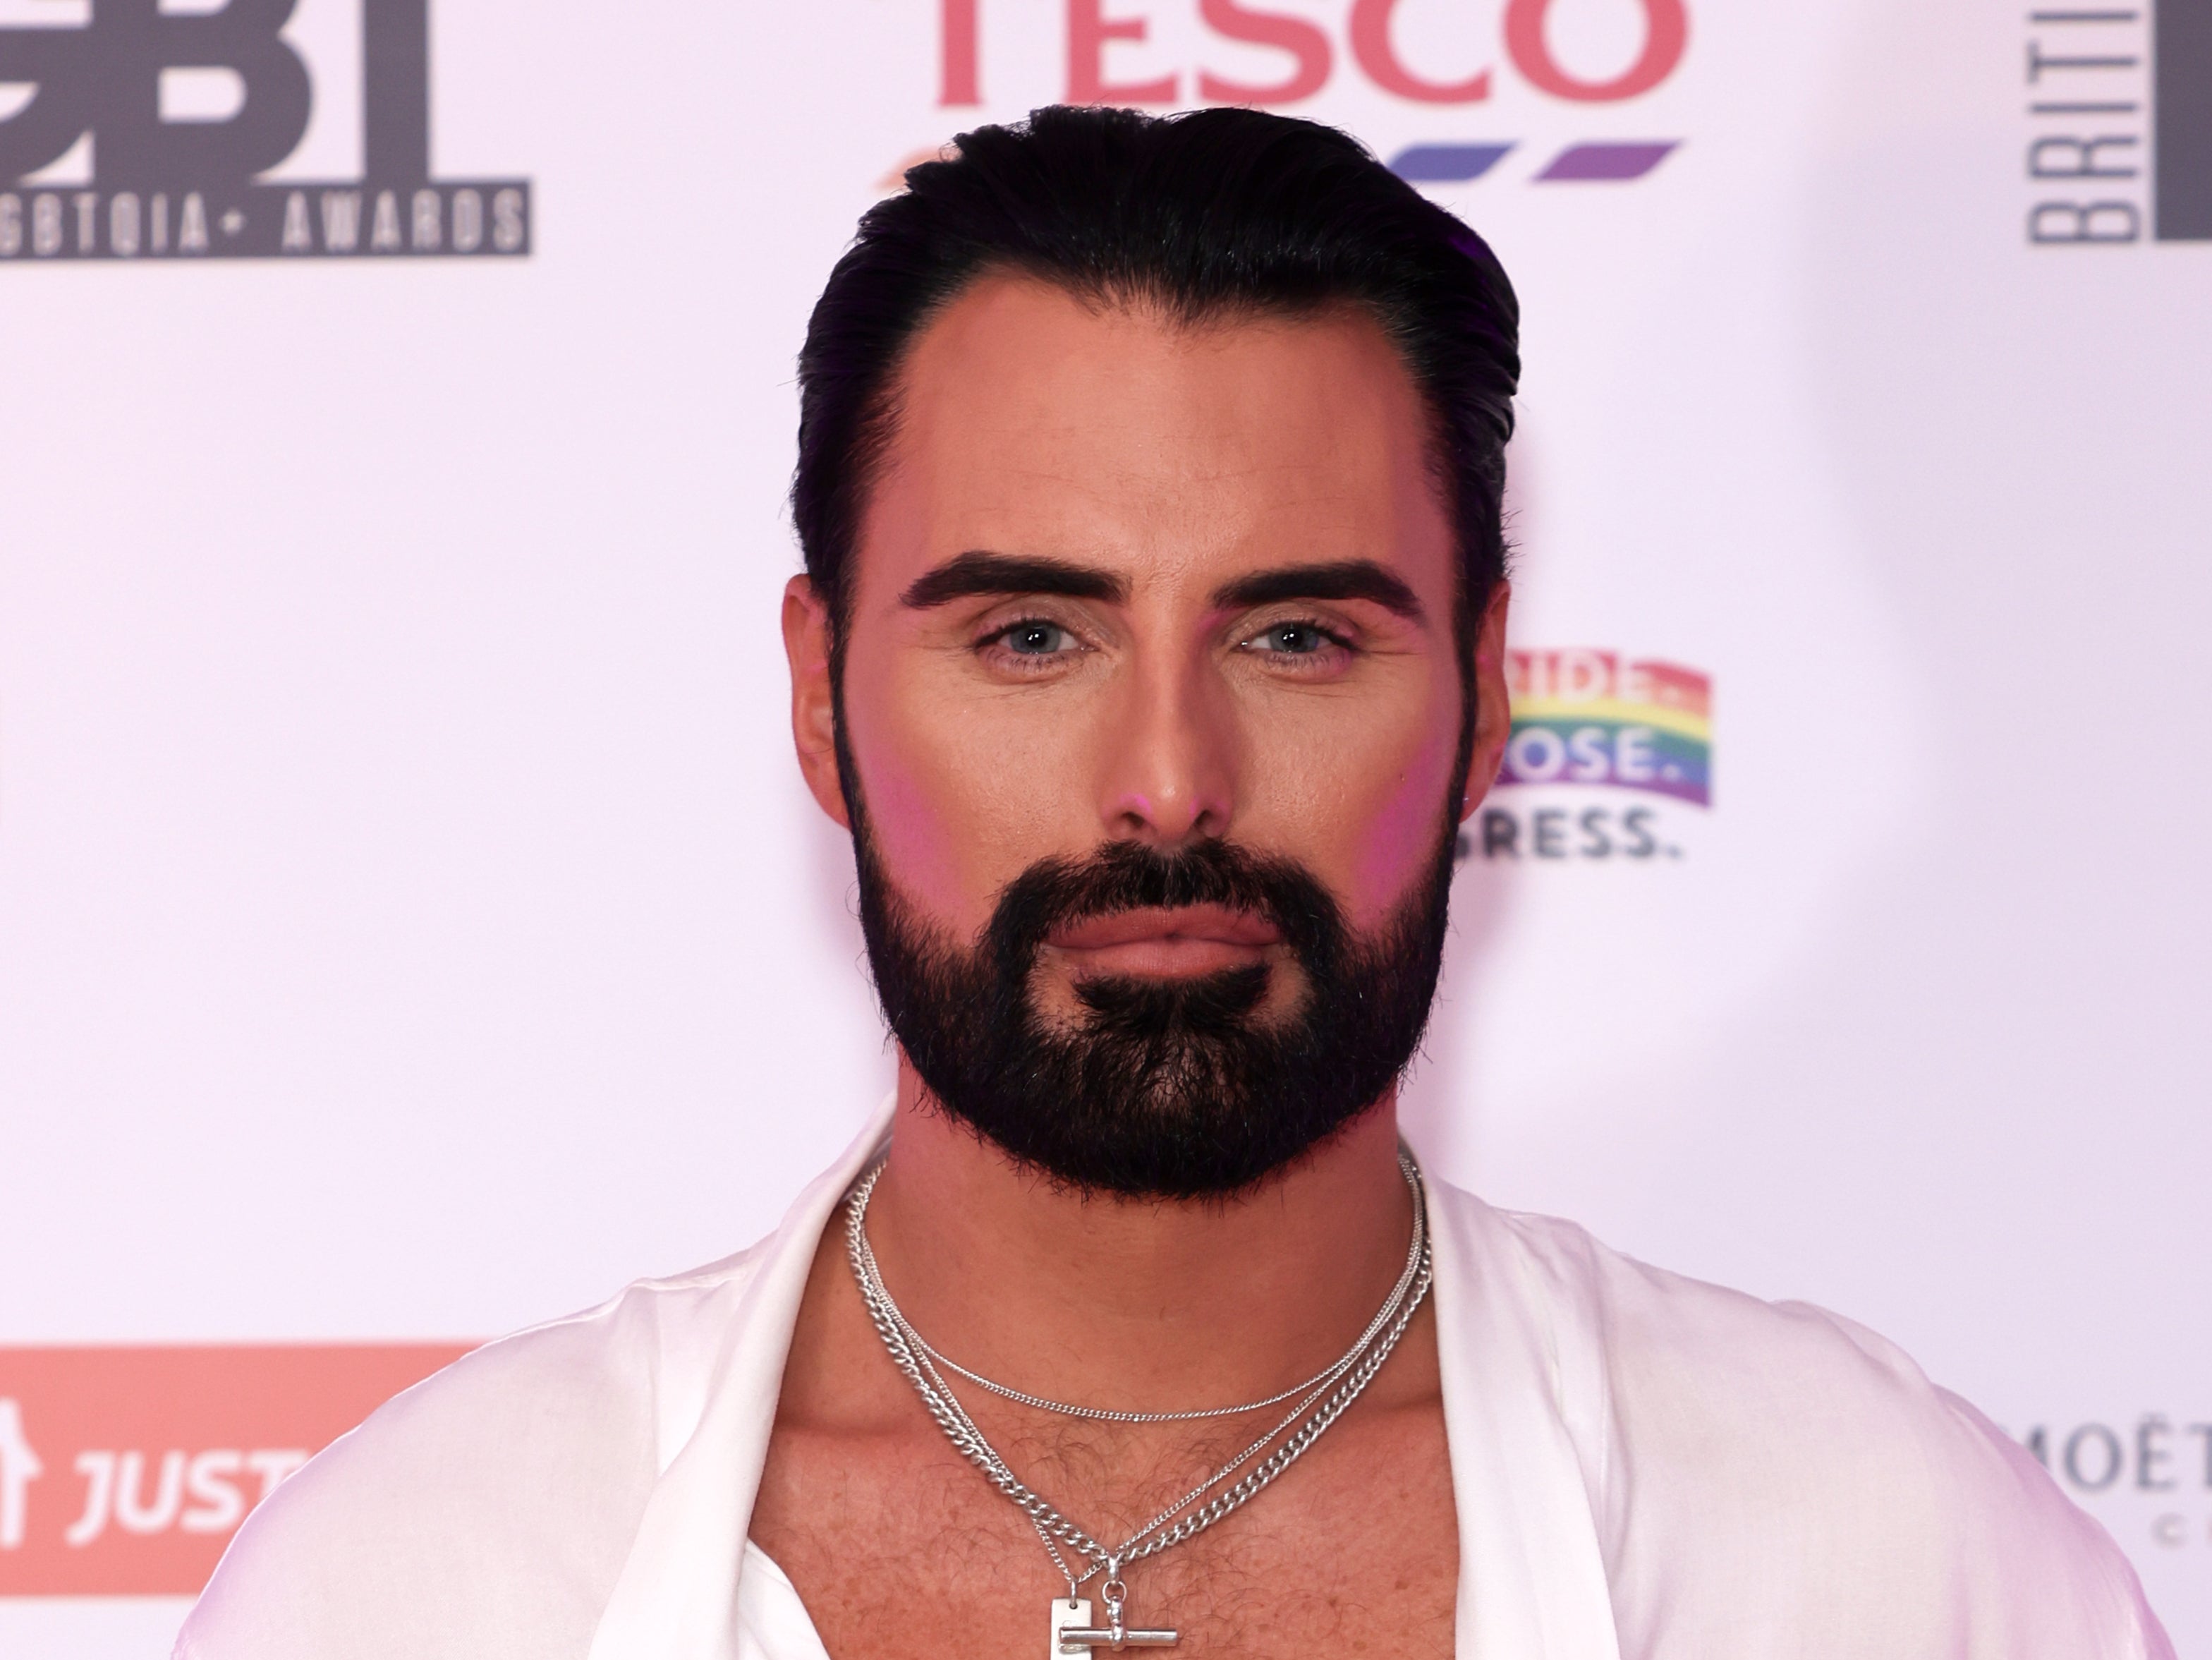 rylan clark, strictly come dancing, rylan clark has blunt answer for fans wanting him to do strictly come dancing